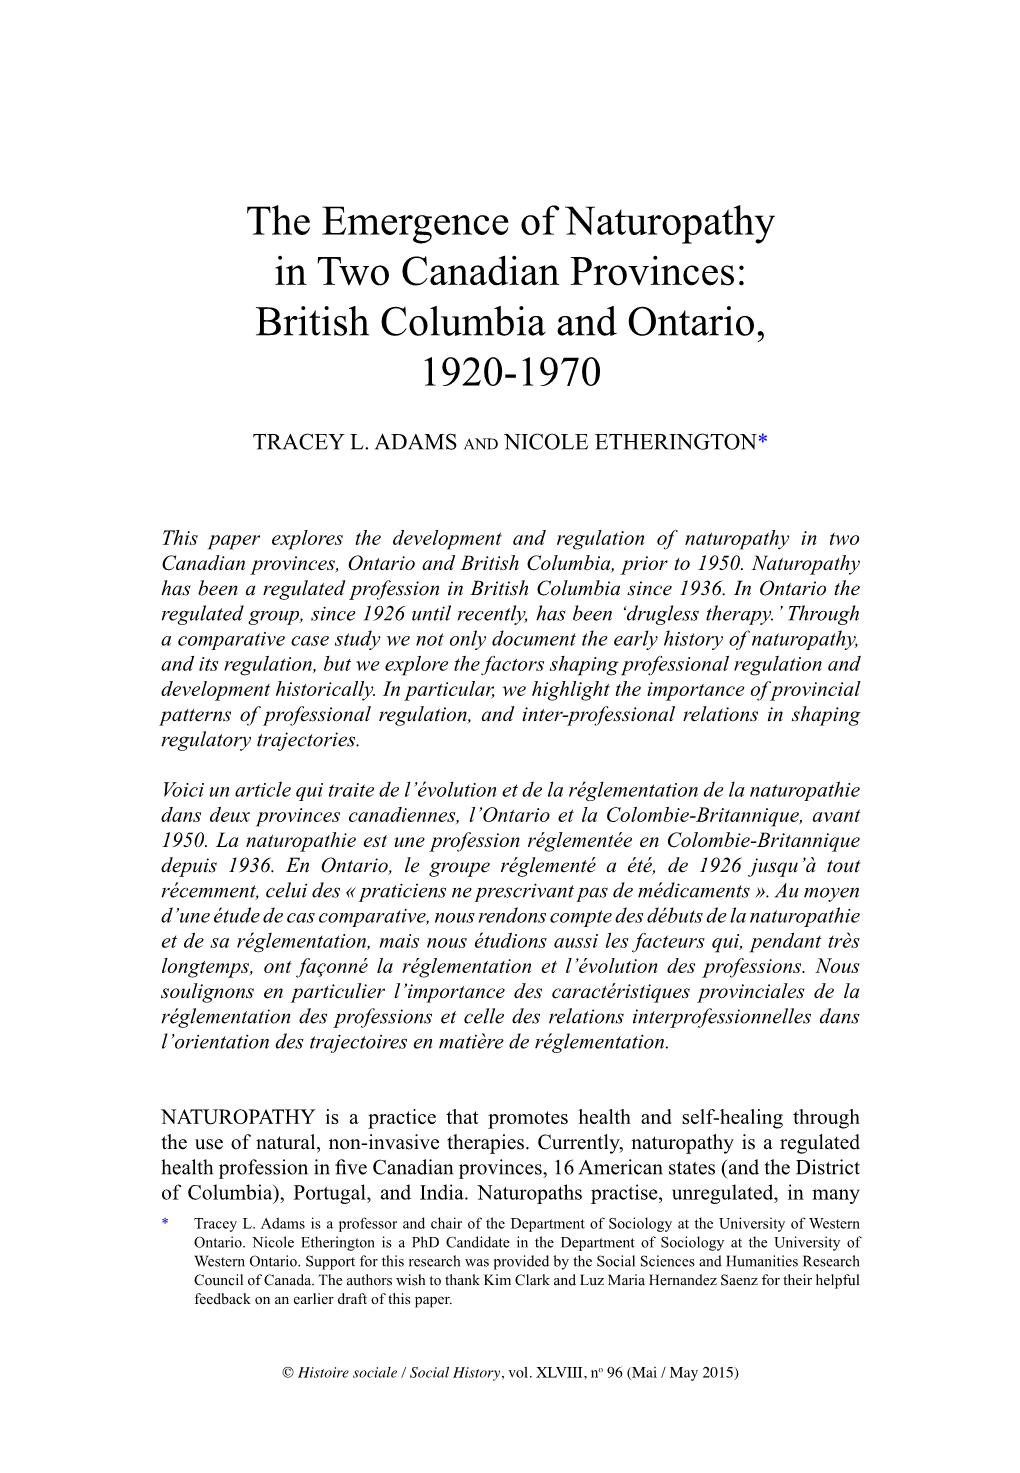 The Emergence of Naturopathy in Two Canadian Provinces: British Columbia and Ontario, 1920-1970